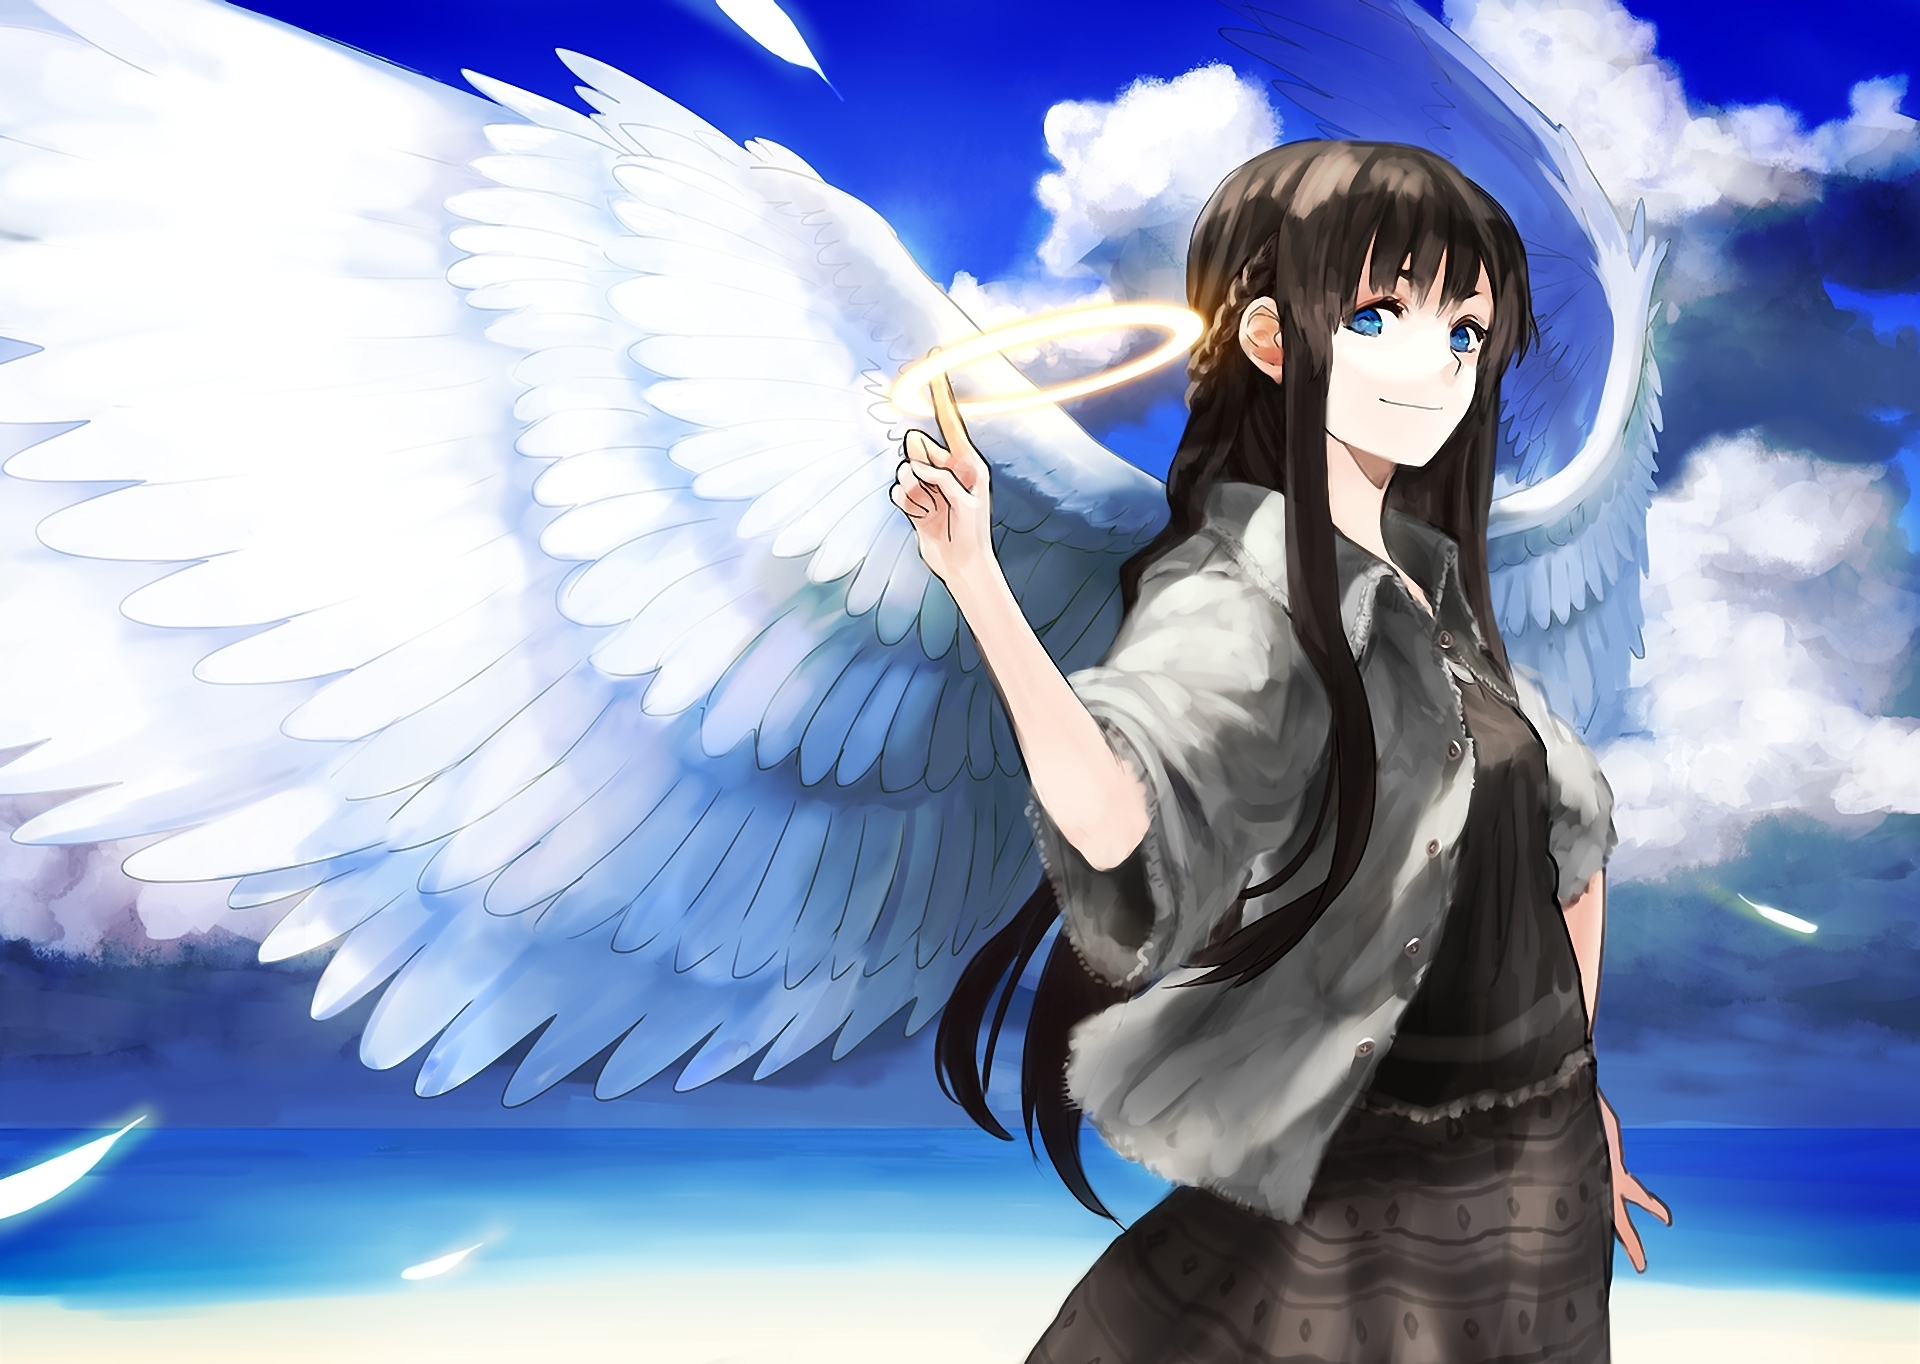 anime, Original, Halo, Wings, Angels, Fantasy, Feathers, Women, Females, Girls, Asian, Oriental, Sky, Clouds, Artistic, Children, Face, Eyes Wallpaper